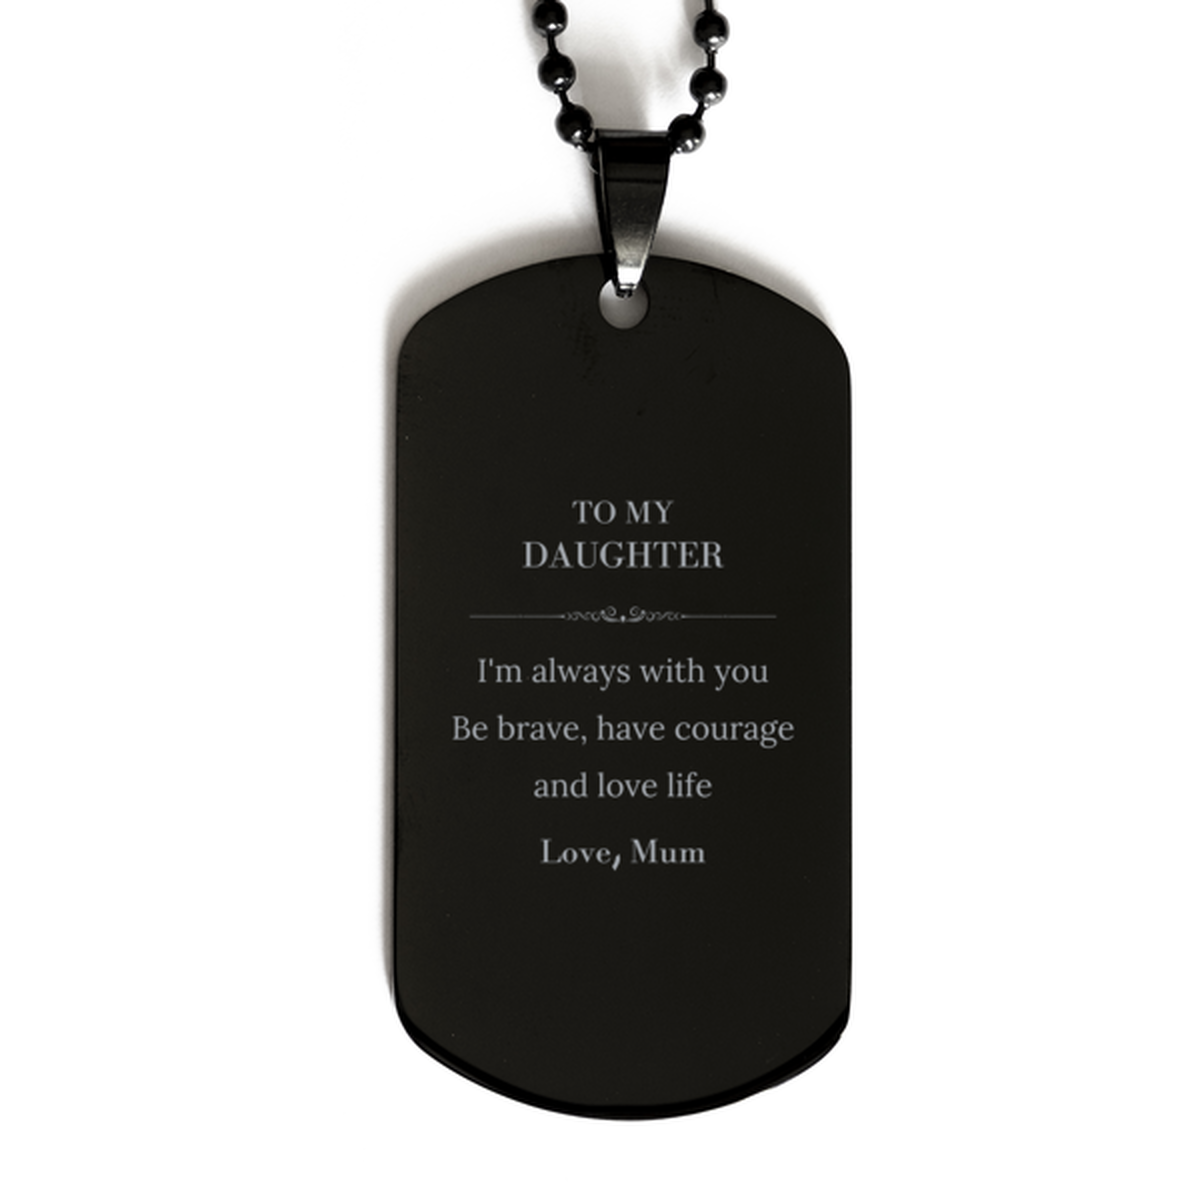 To My Daughter Gifts from Mum, Unique Black Dog Tag Inspirational Christmas Birthday Graduation Gifts for Daughter I'm always with you. Be brave, have courage and love life. Love, Mum